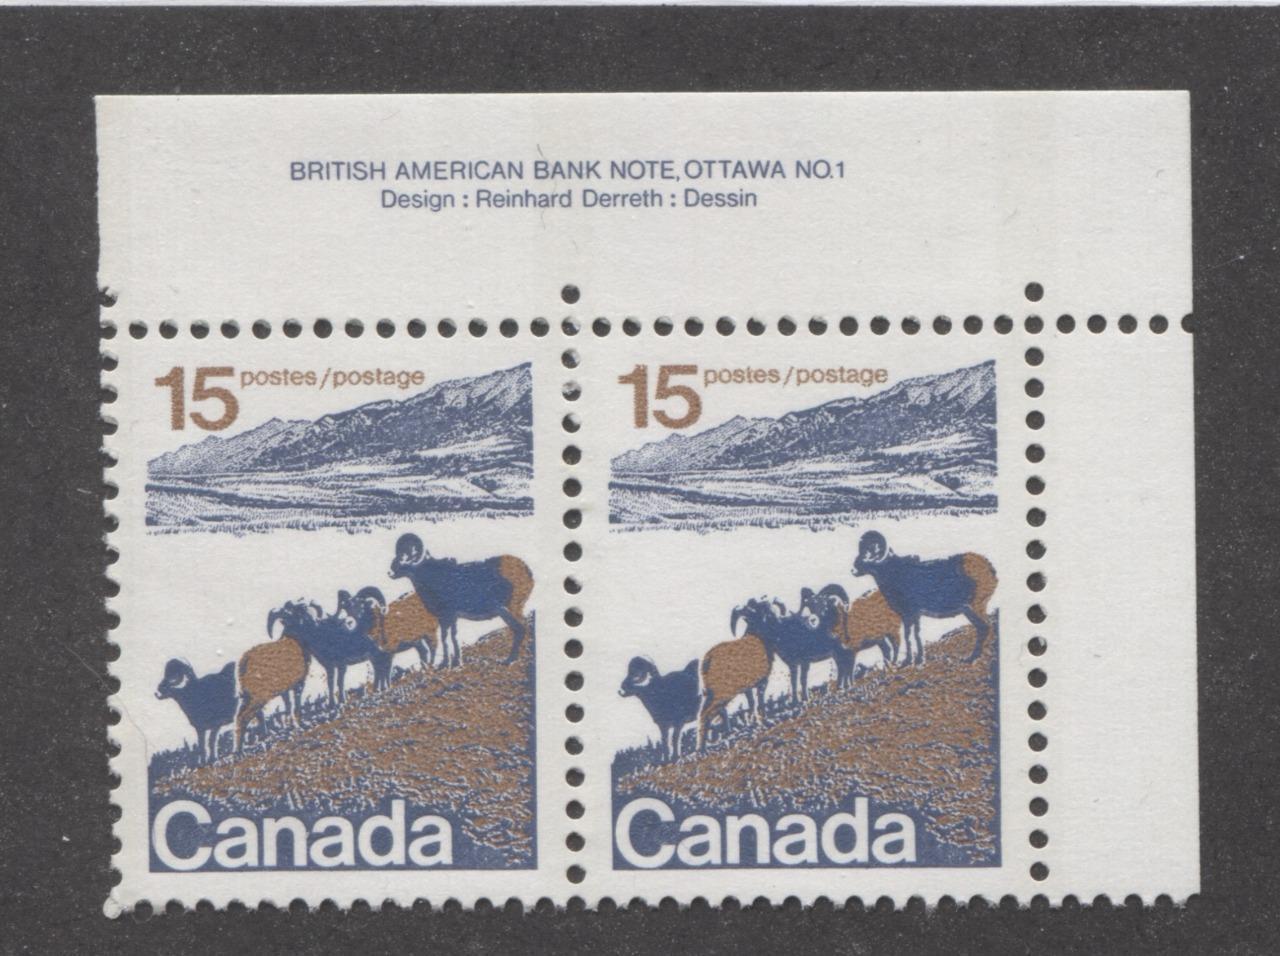 Canada #595ii (SG#703) 15c Mountain Sheep 1972-1978 Caricature Issue Type 1, 3 mm OP-2 Tagging, Paper Type 6 Plate 1 Pr VF-84 NH Brixton Chrome 